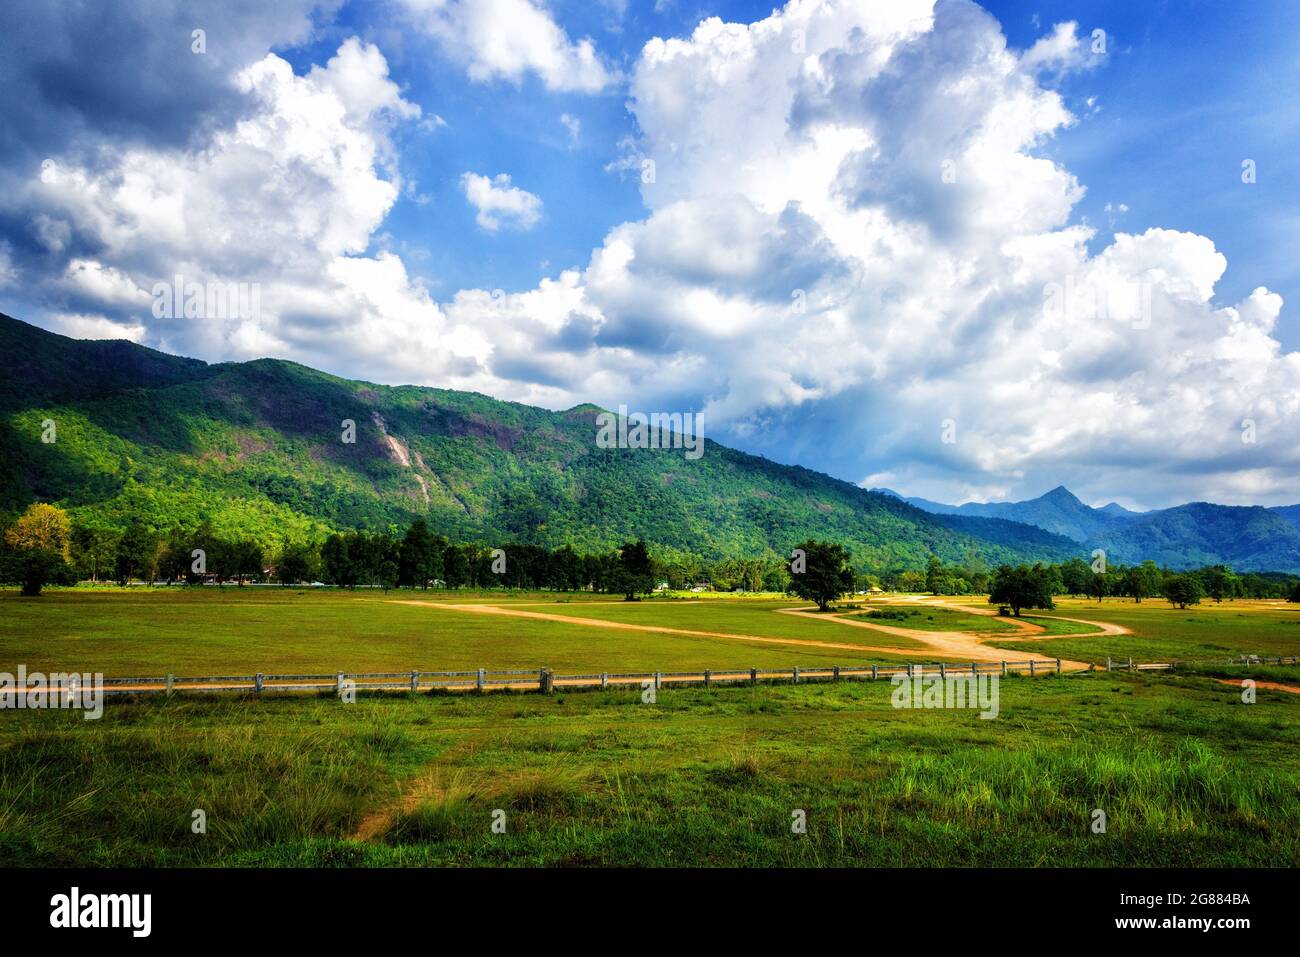 beautiful country scene in cloudy day with mountain range in the background. Stock Photo